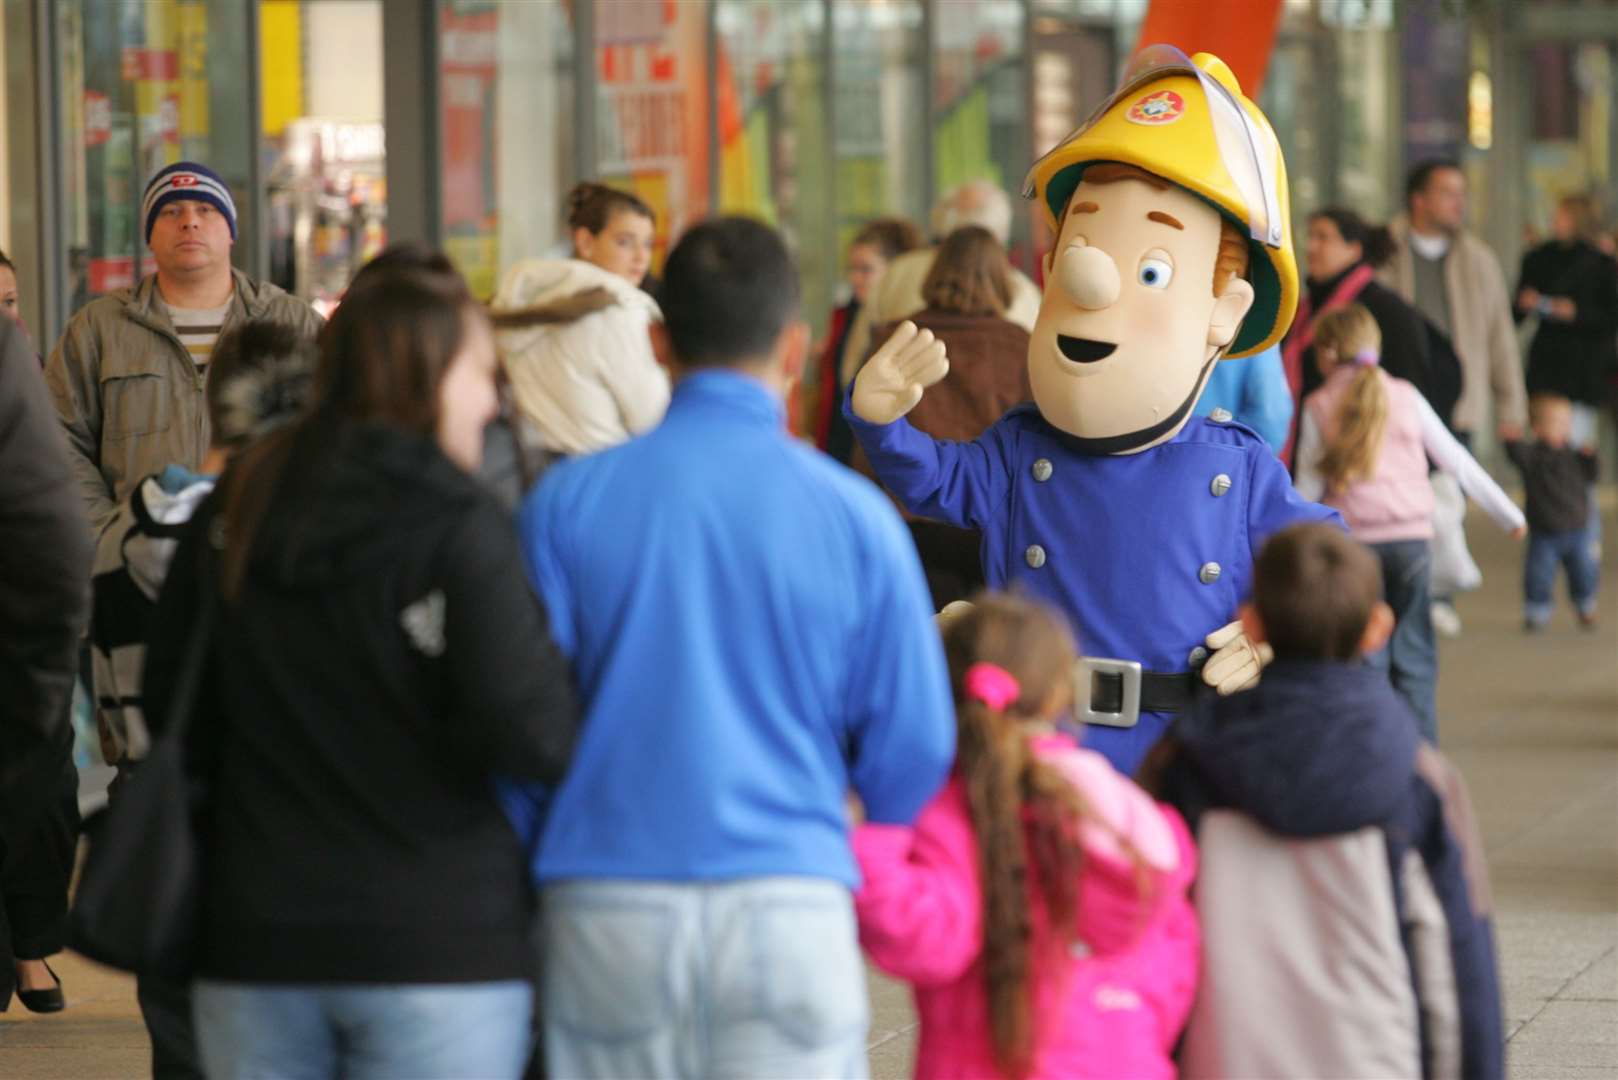 Fireman Sam meets the shoppers in 2007